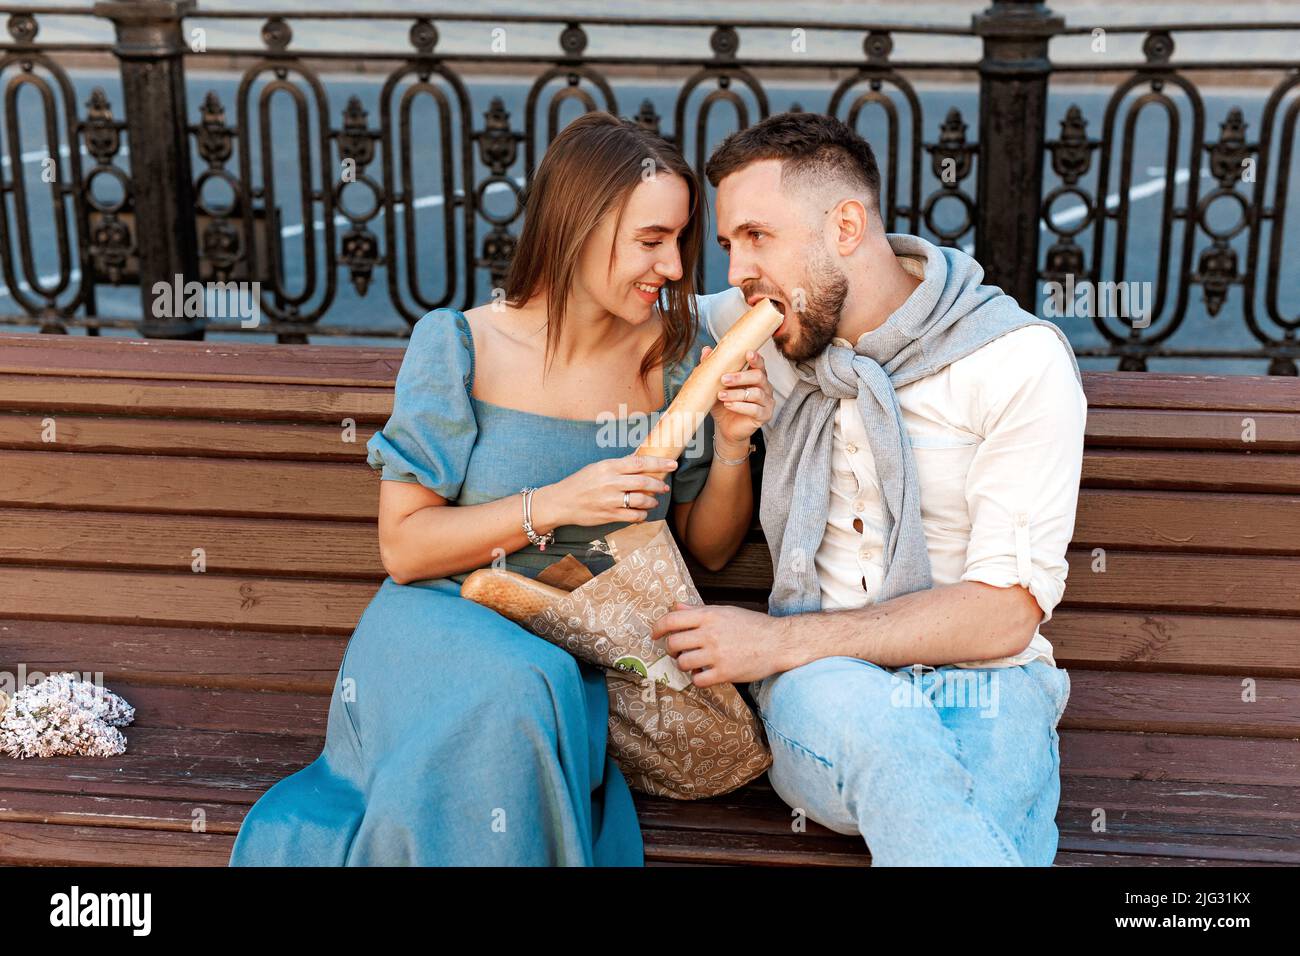 Couple sitting on the park bench and eating sandwich , having fun outdoors. Dating, lifestyle concept Stock Photo